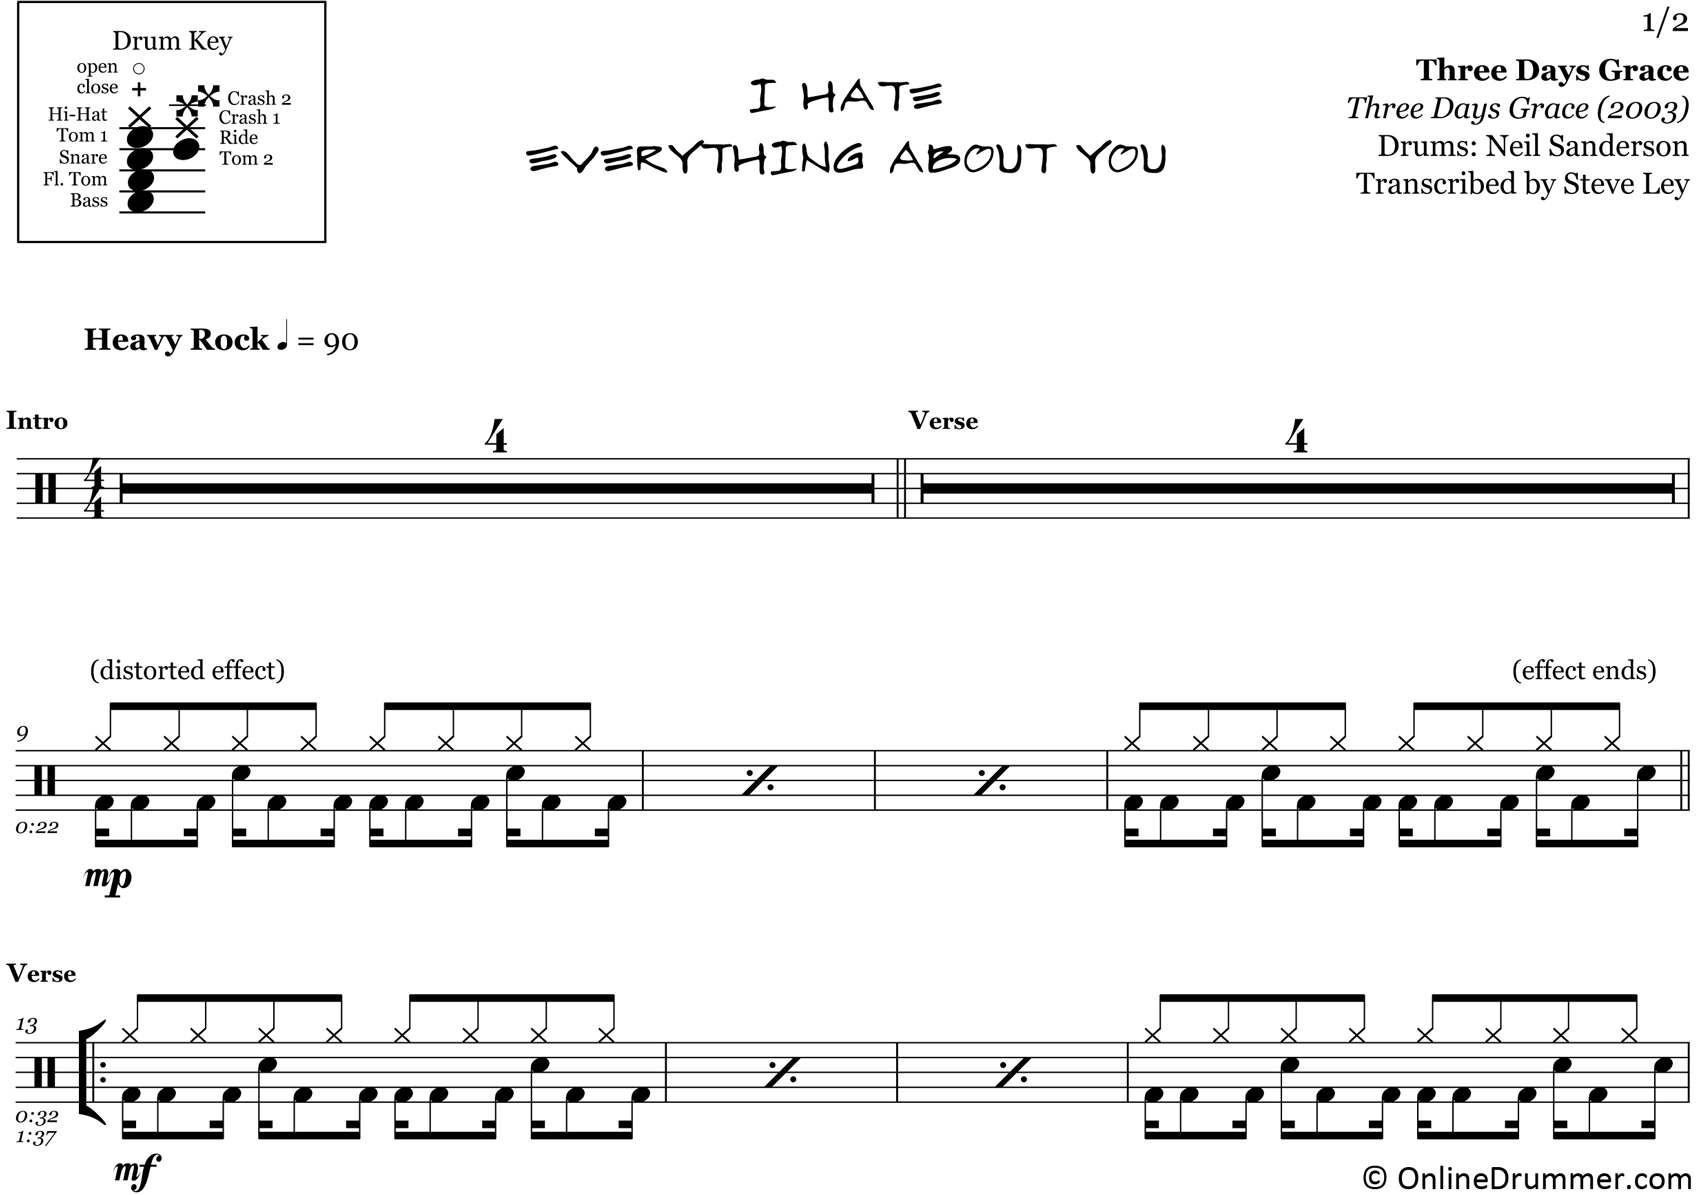 I Hate Everything About You - Three Days Grace - Drum Sheet Music